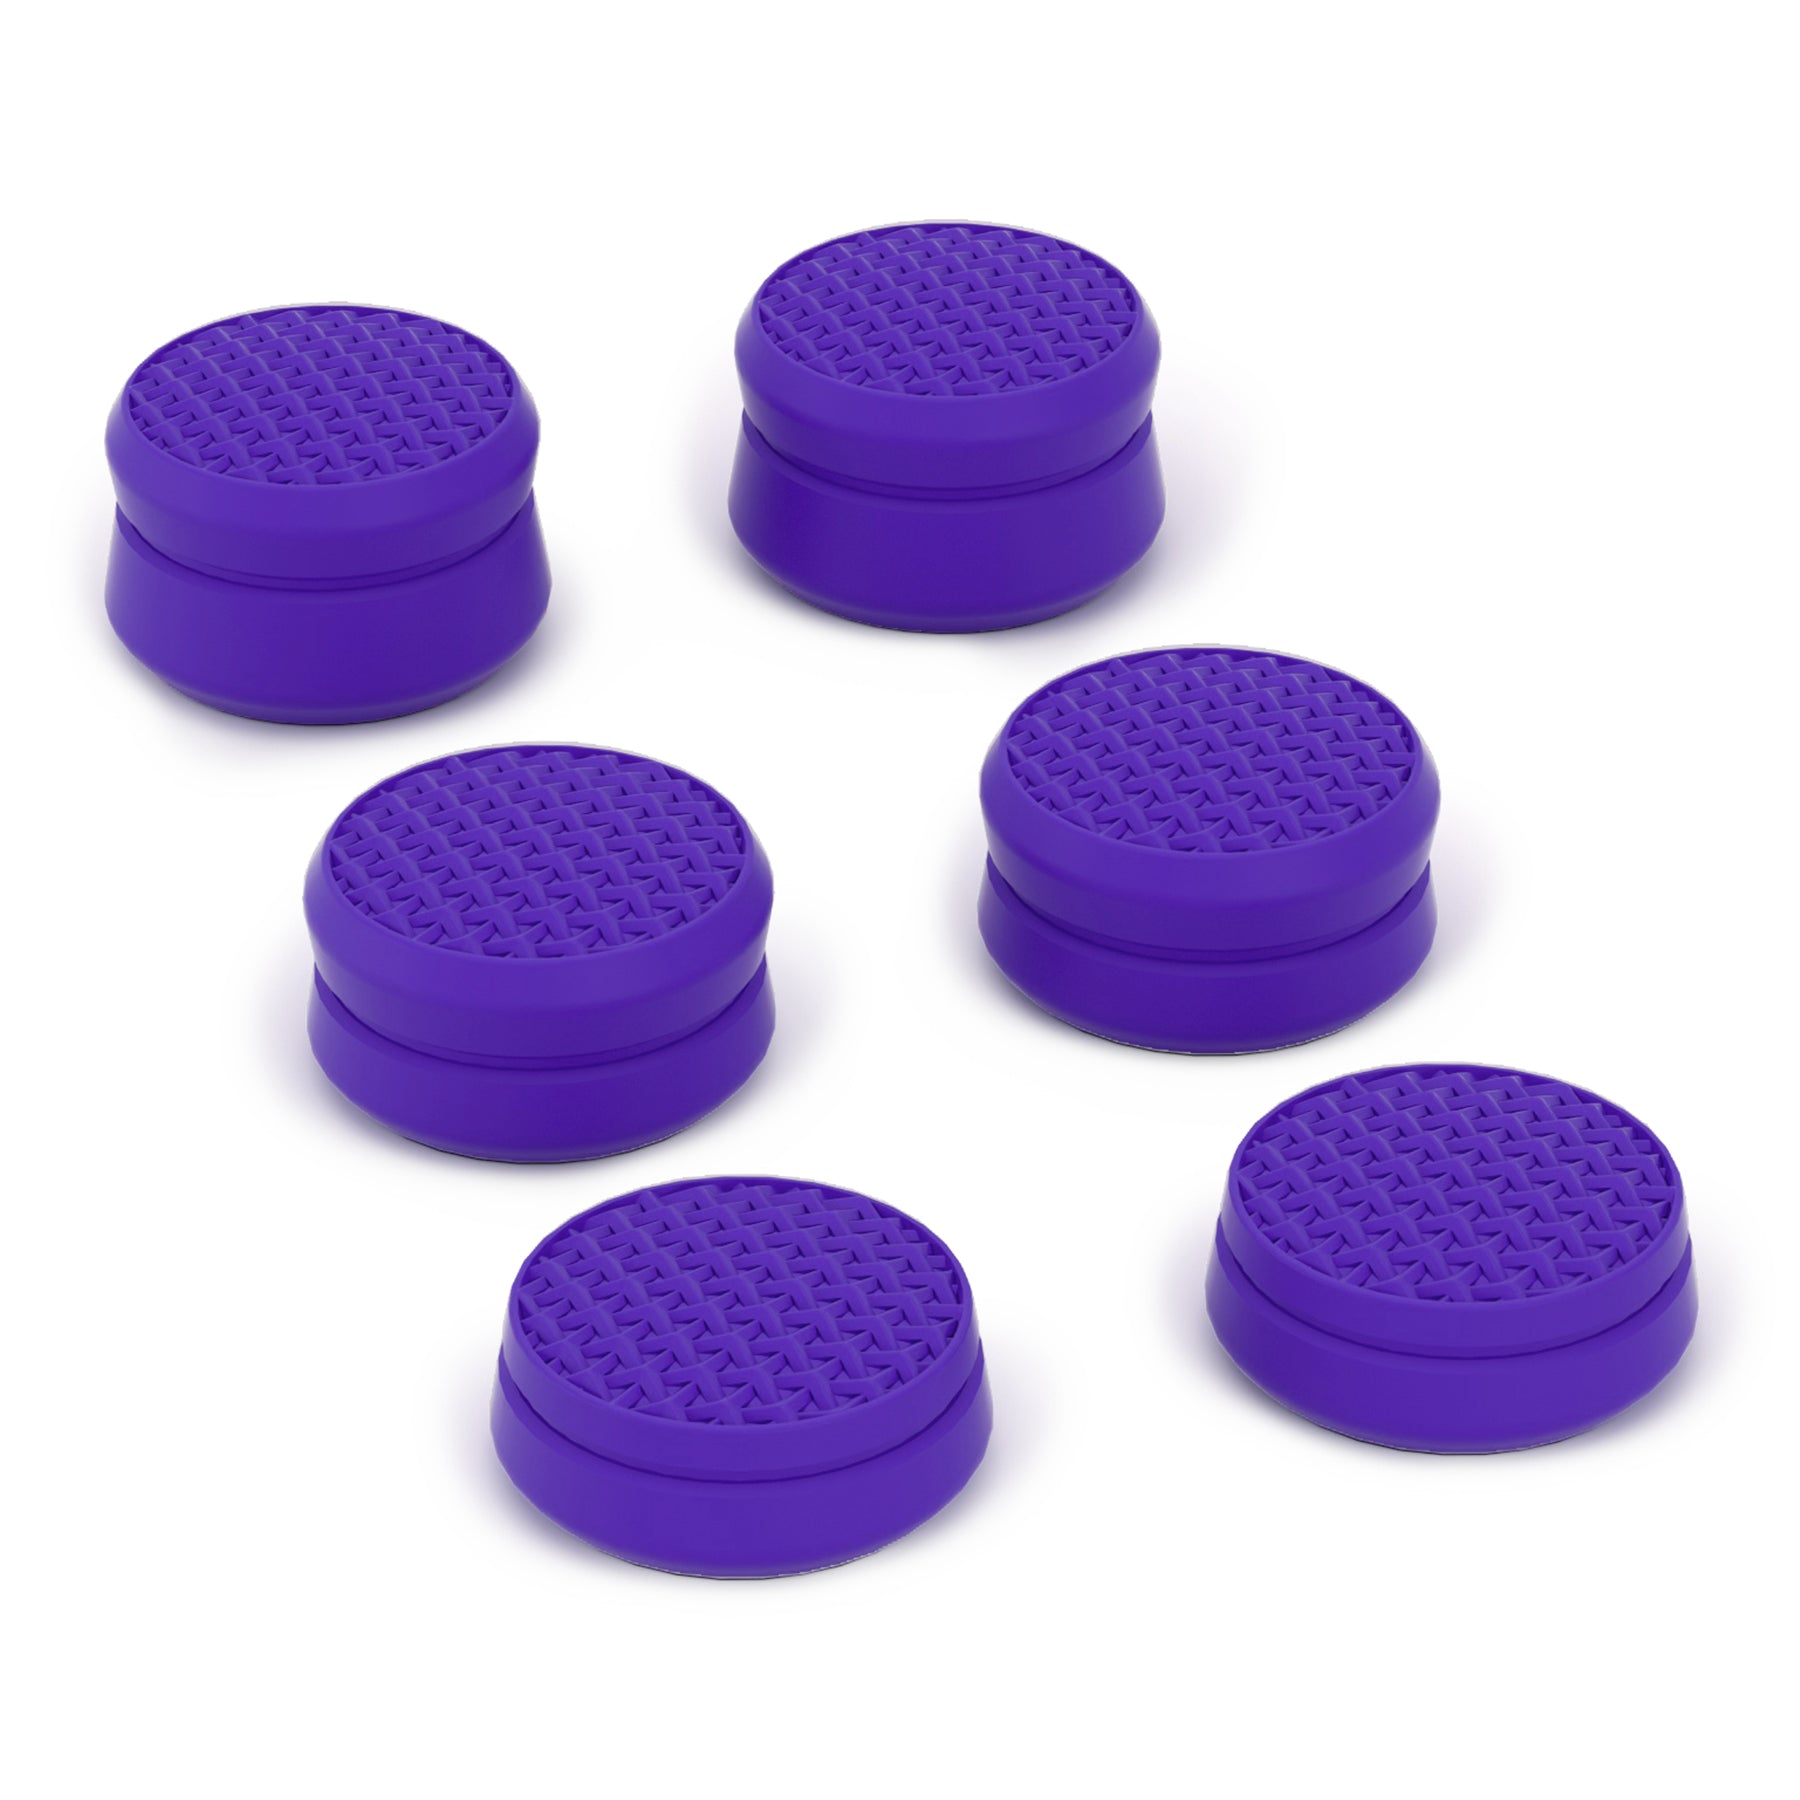 PlayVital 3 Height Armor Thumbs Cushion Caps Thumb Grips for ps5, for ps4, Thumbstick Grip Cover for Xbox Core Wireless Controller, Thumb Grip Caps for Xbox One, Elite Series 2, for Switch Pro - Purple - PJM3069 PlayVital